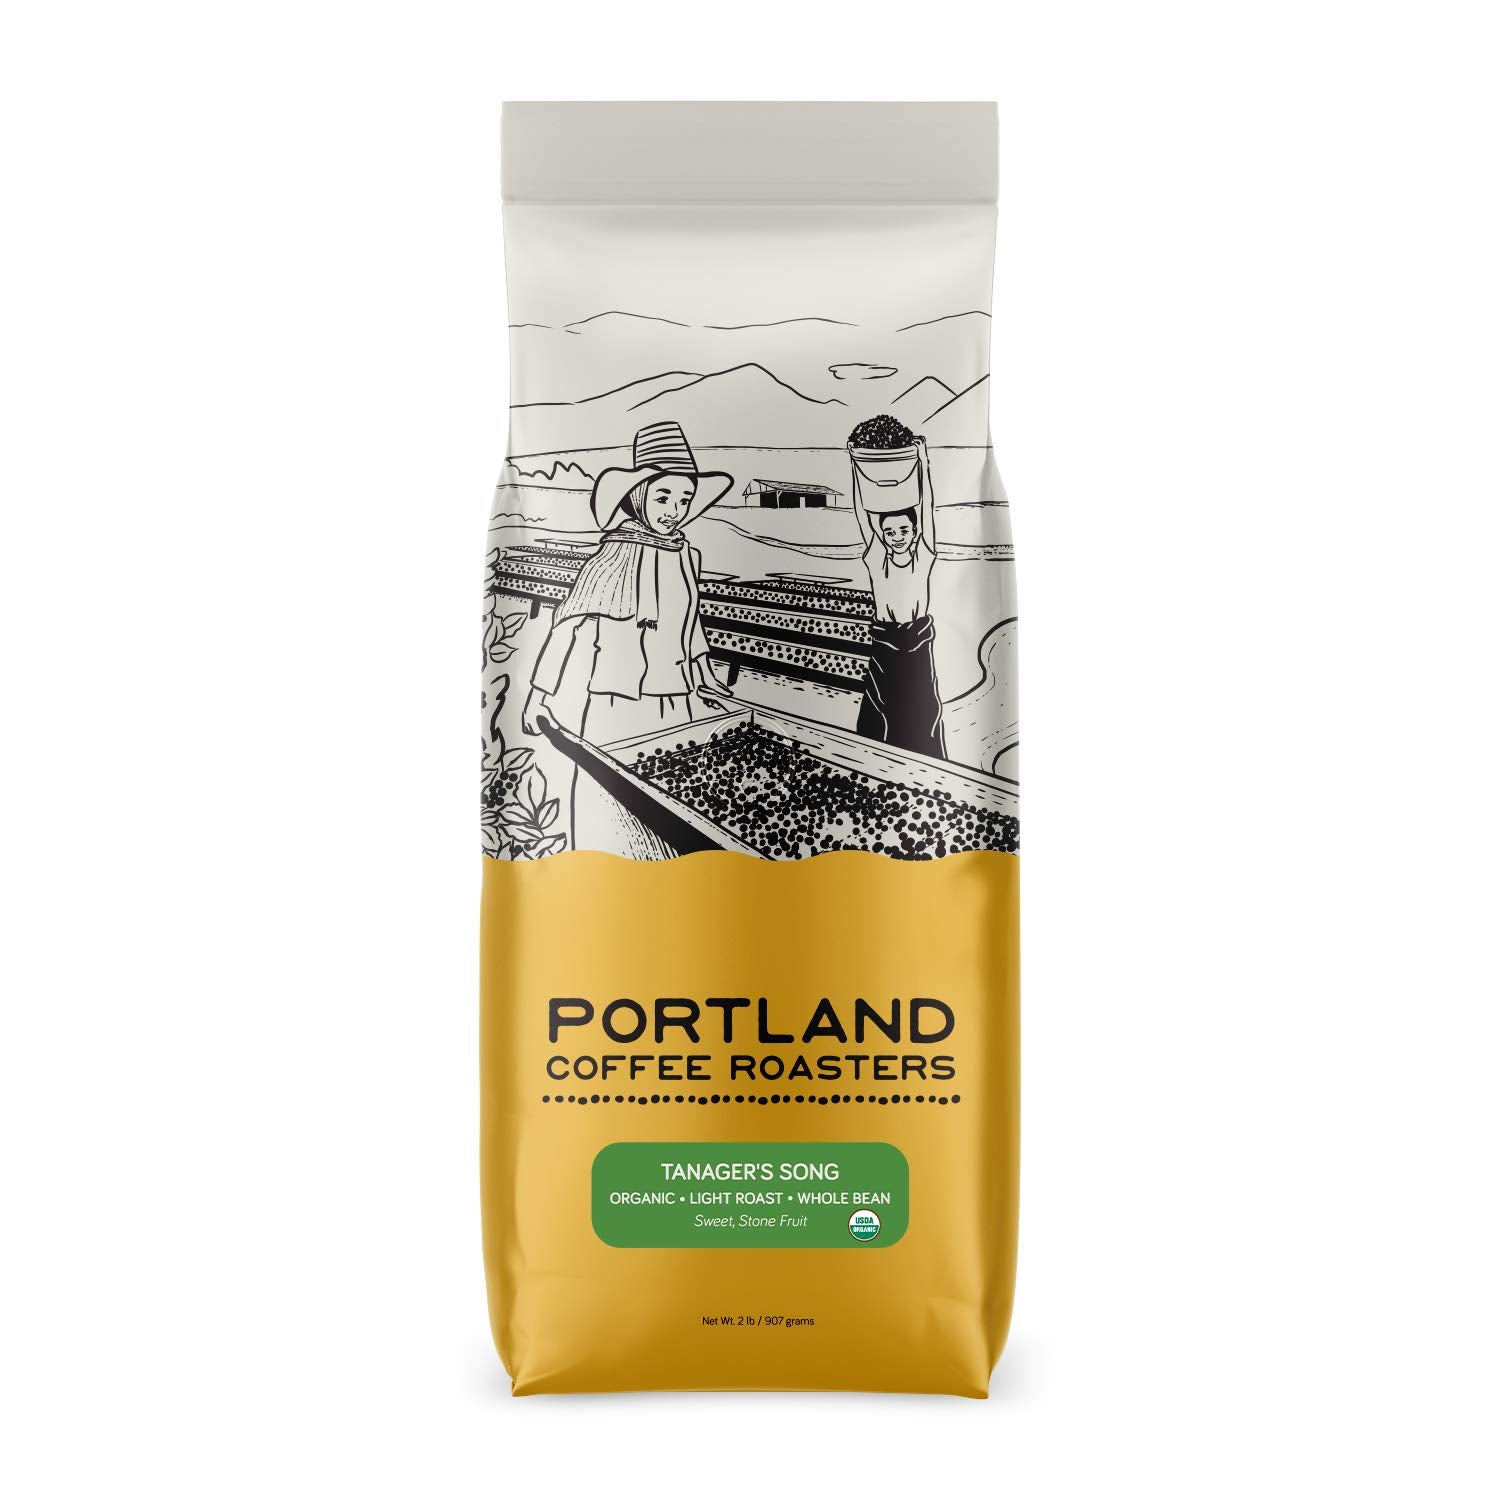 Tanager's Song (Organic) from Portland Coffee Roasters - WHOLE BEAN…